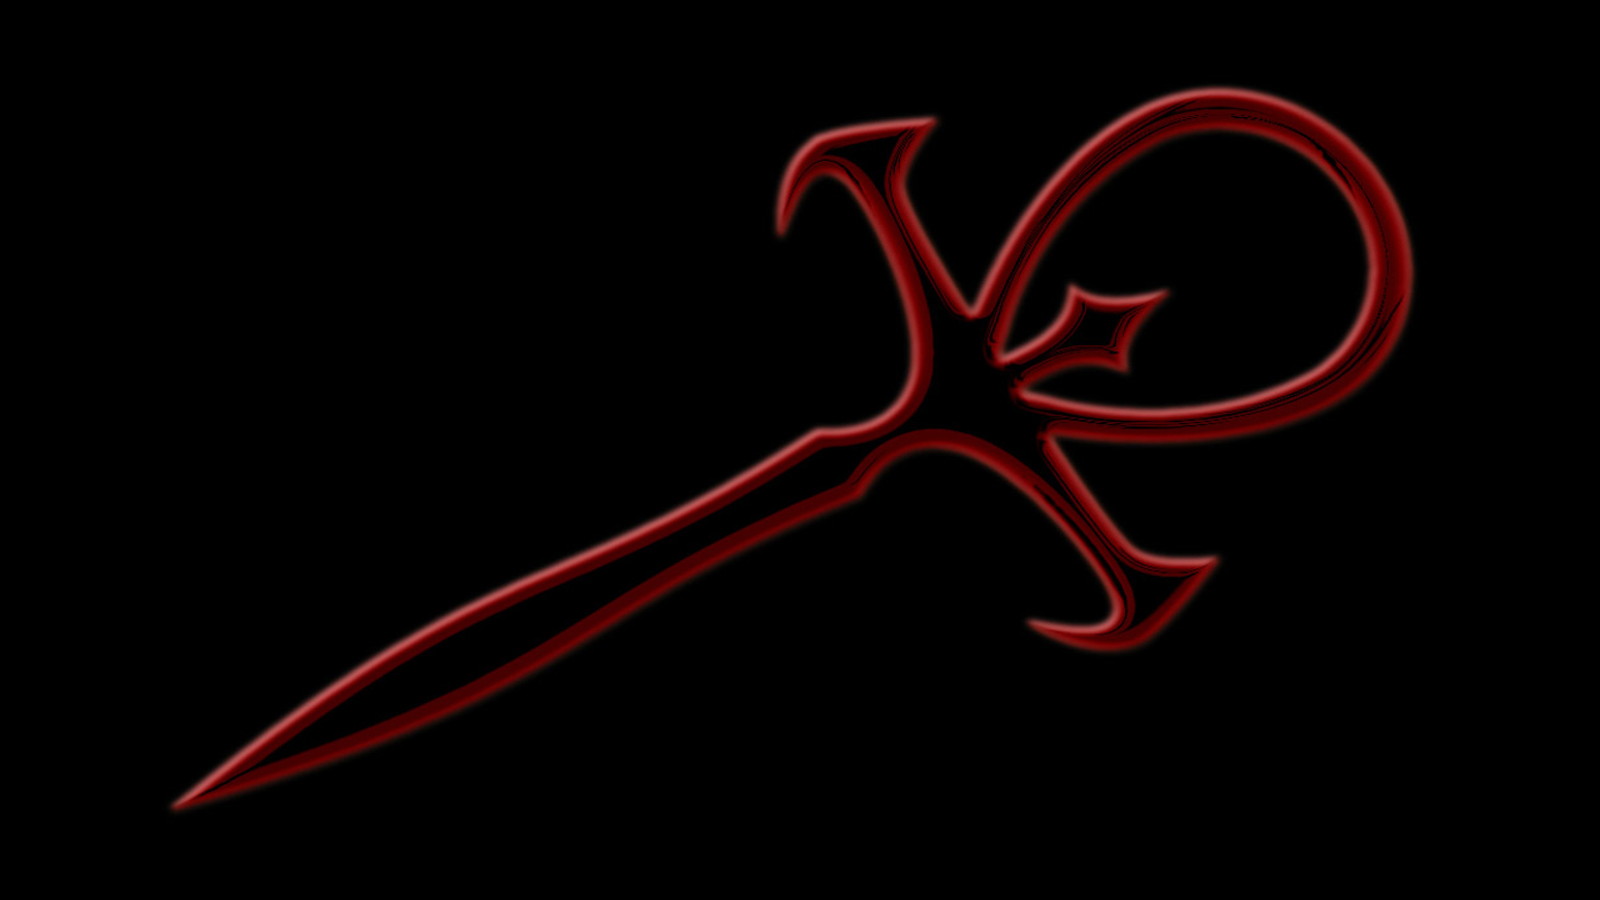 Vampire: The Masquerade: Bloodlines' fan patch is updated to include more  content